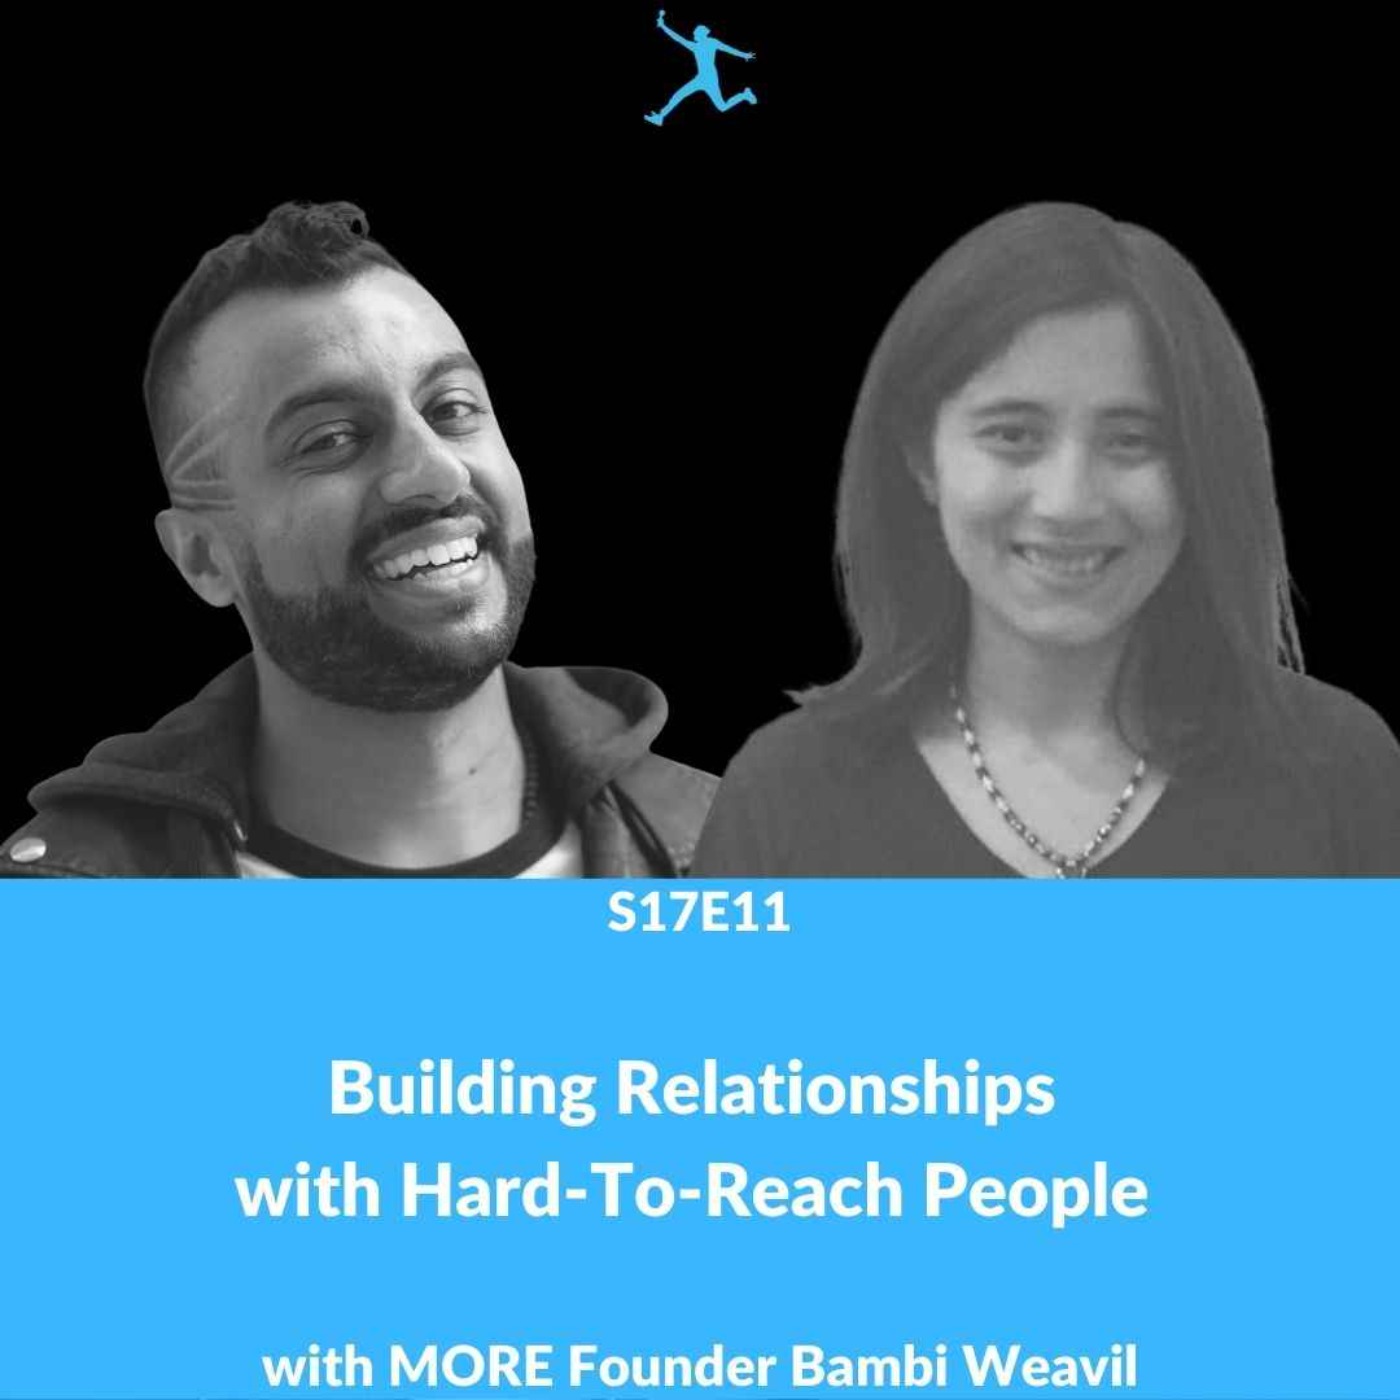 S17E11: Building Relationships with Hard-To-Reach People with MORE Founder Bambi Weavil